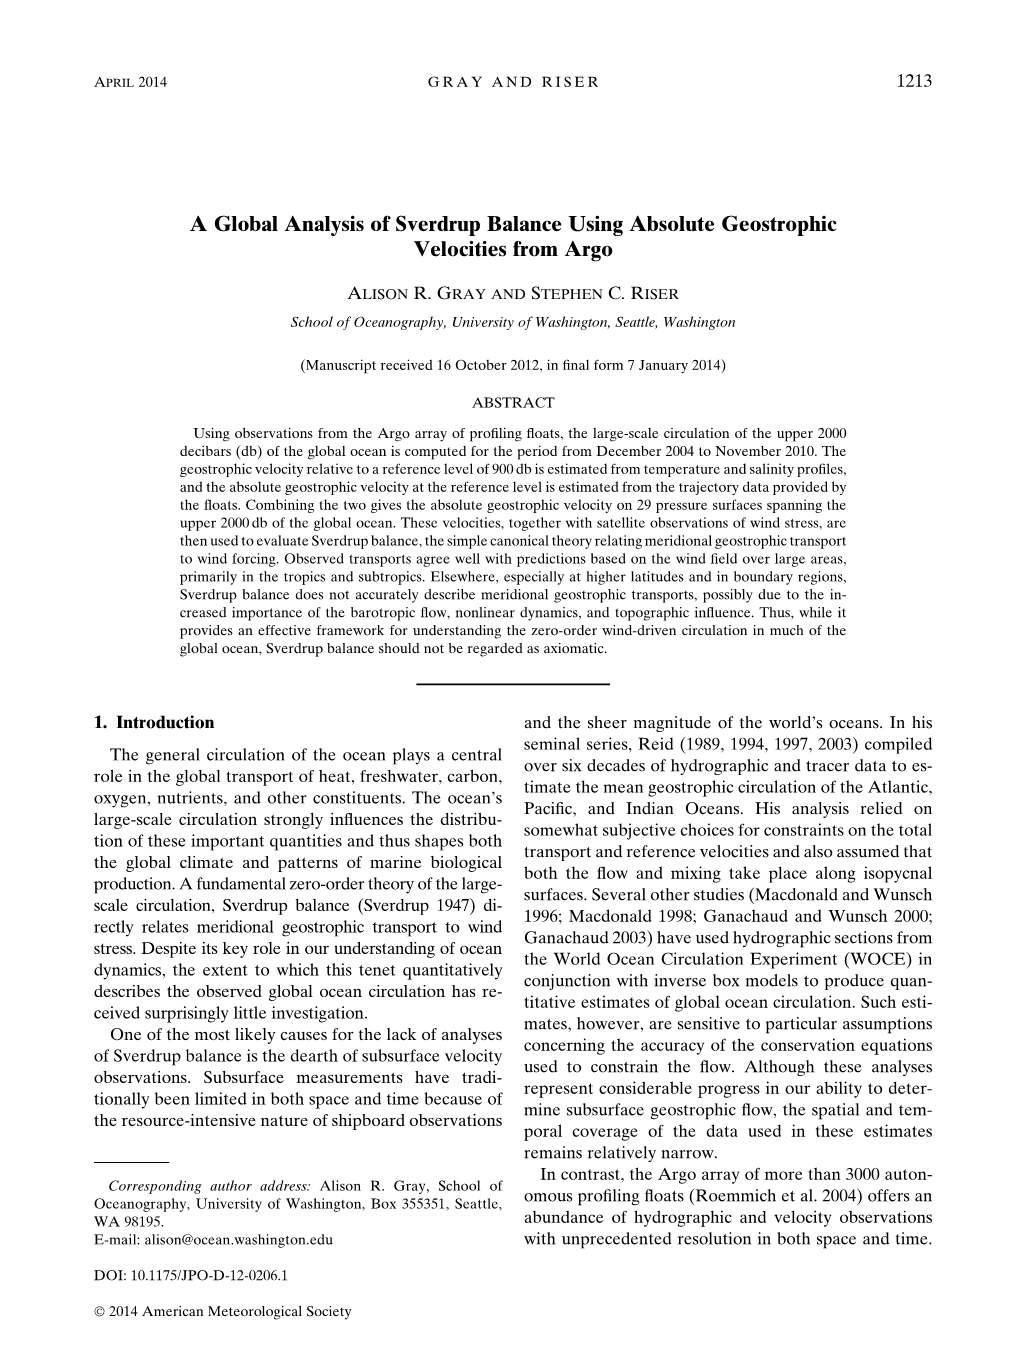 A Global Analysis of Sverdrup Balance Using Absolute Geostrophic Velocities from Argo